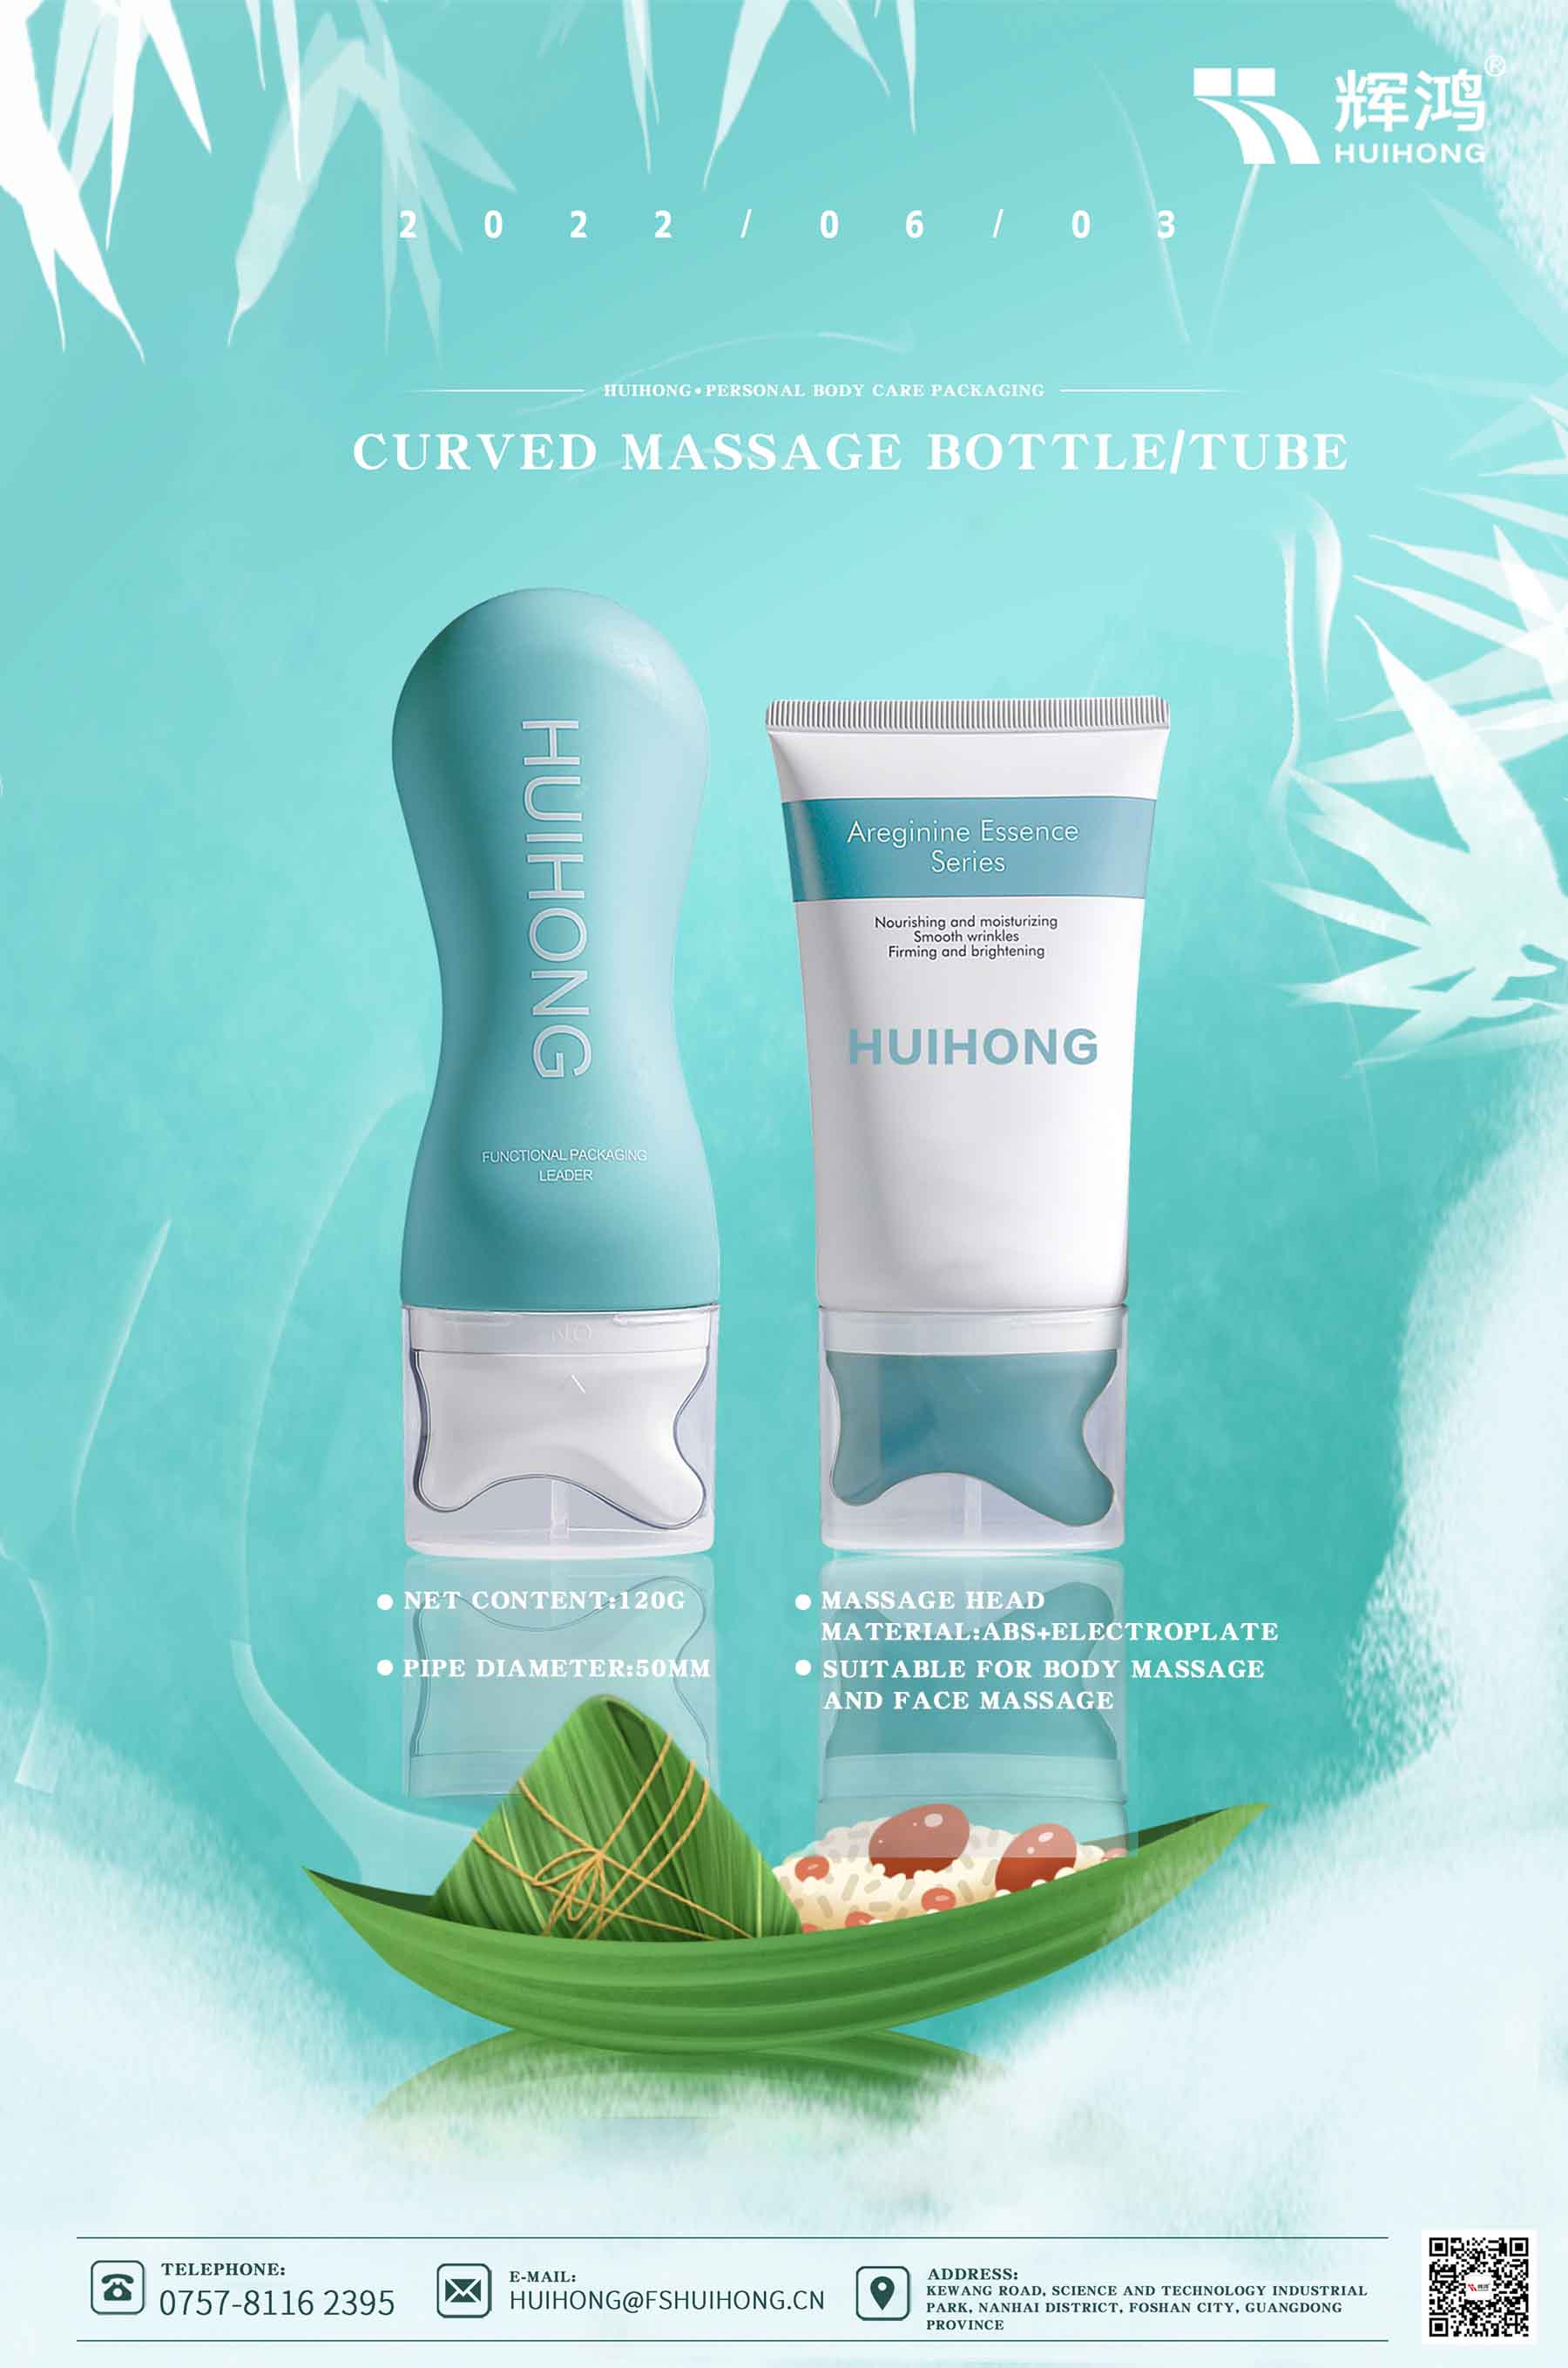 HUIHONG body care massage packaging to celebrate the Dragon Boat Festival